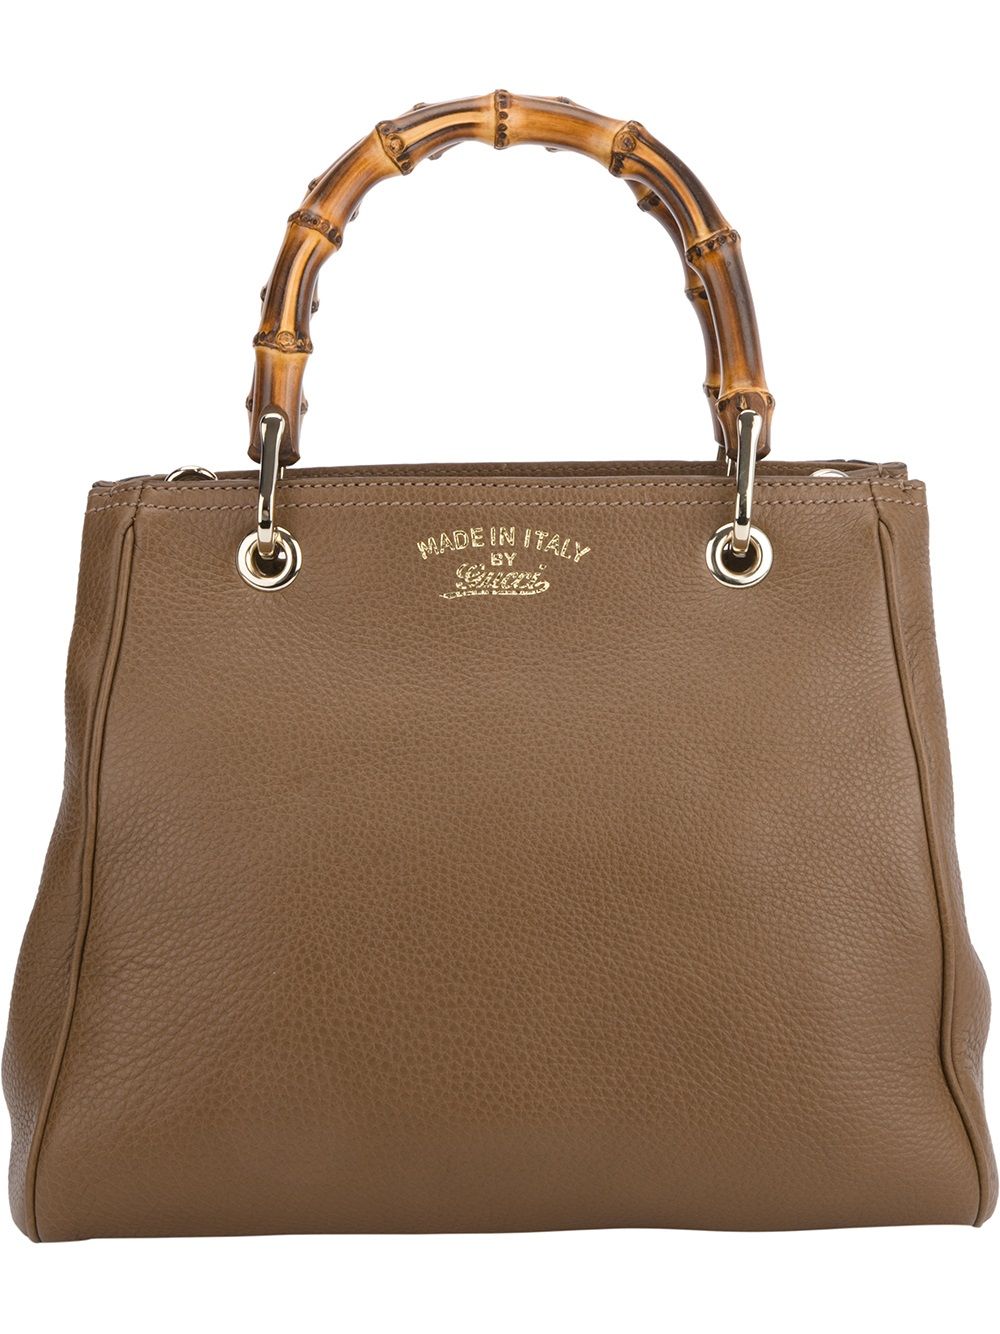 Gucci Bamboo Tote Bag in Brown (bamboo) | Lyst